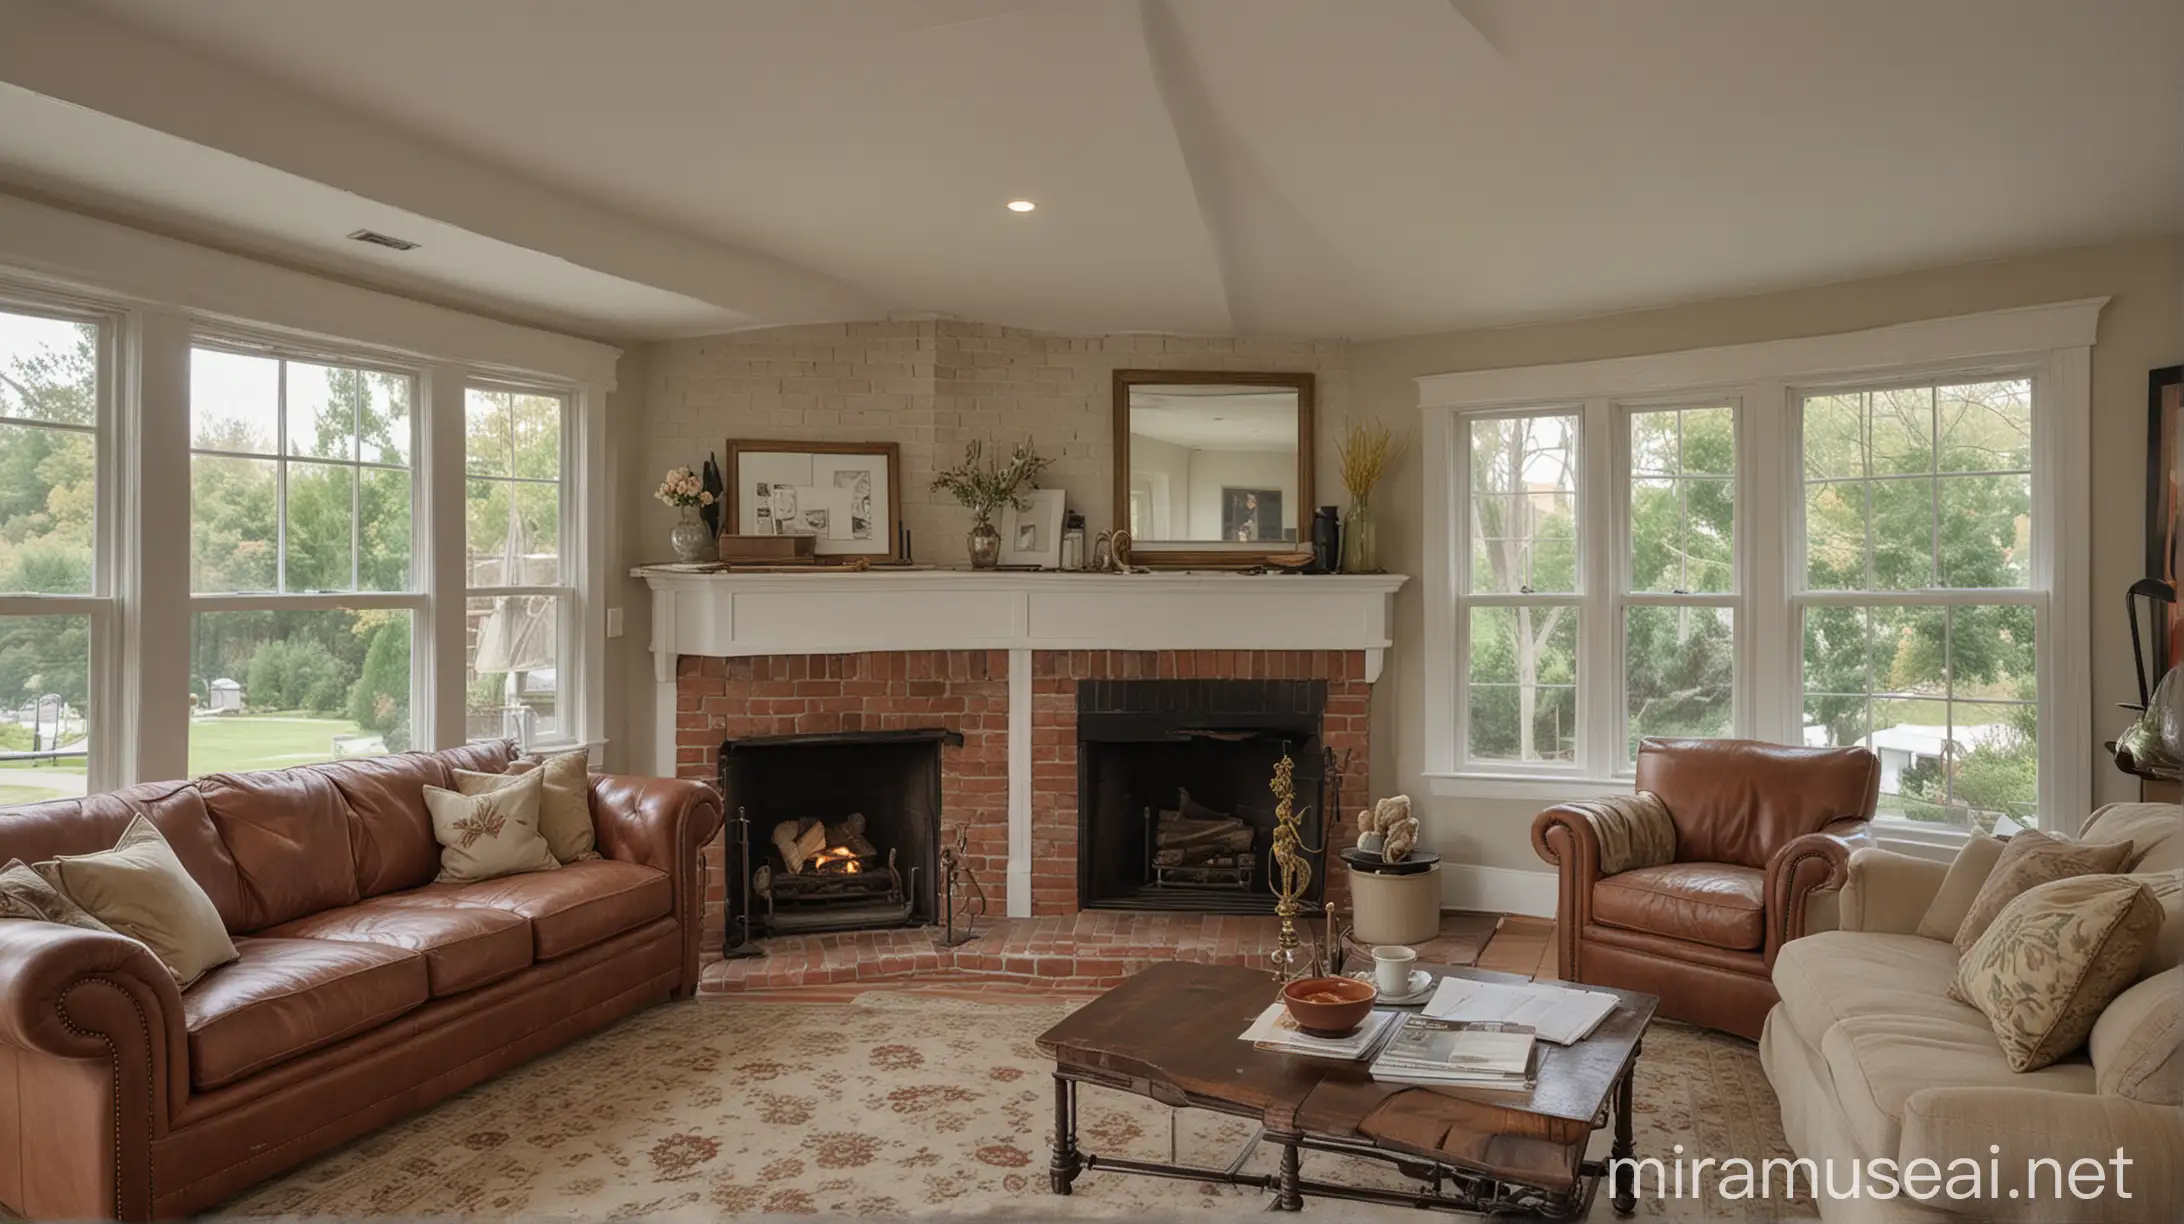 The brick fireplace is nestled in the corner of the house with calming and comfortable classic furniture and windows